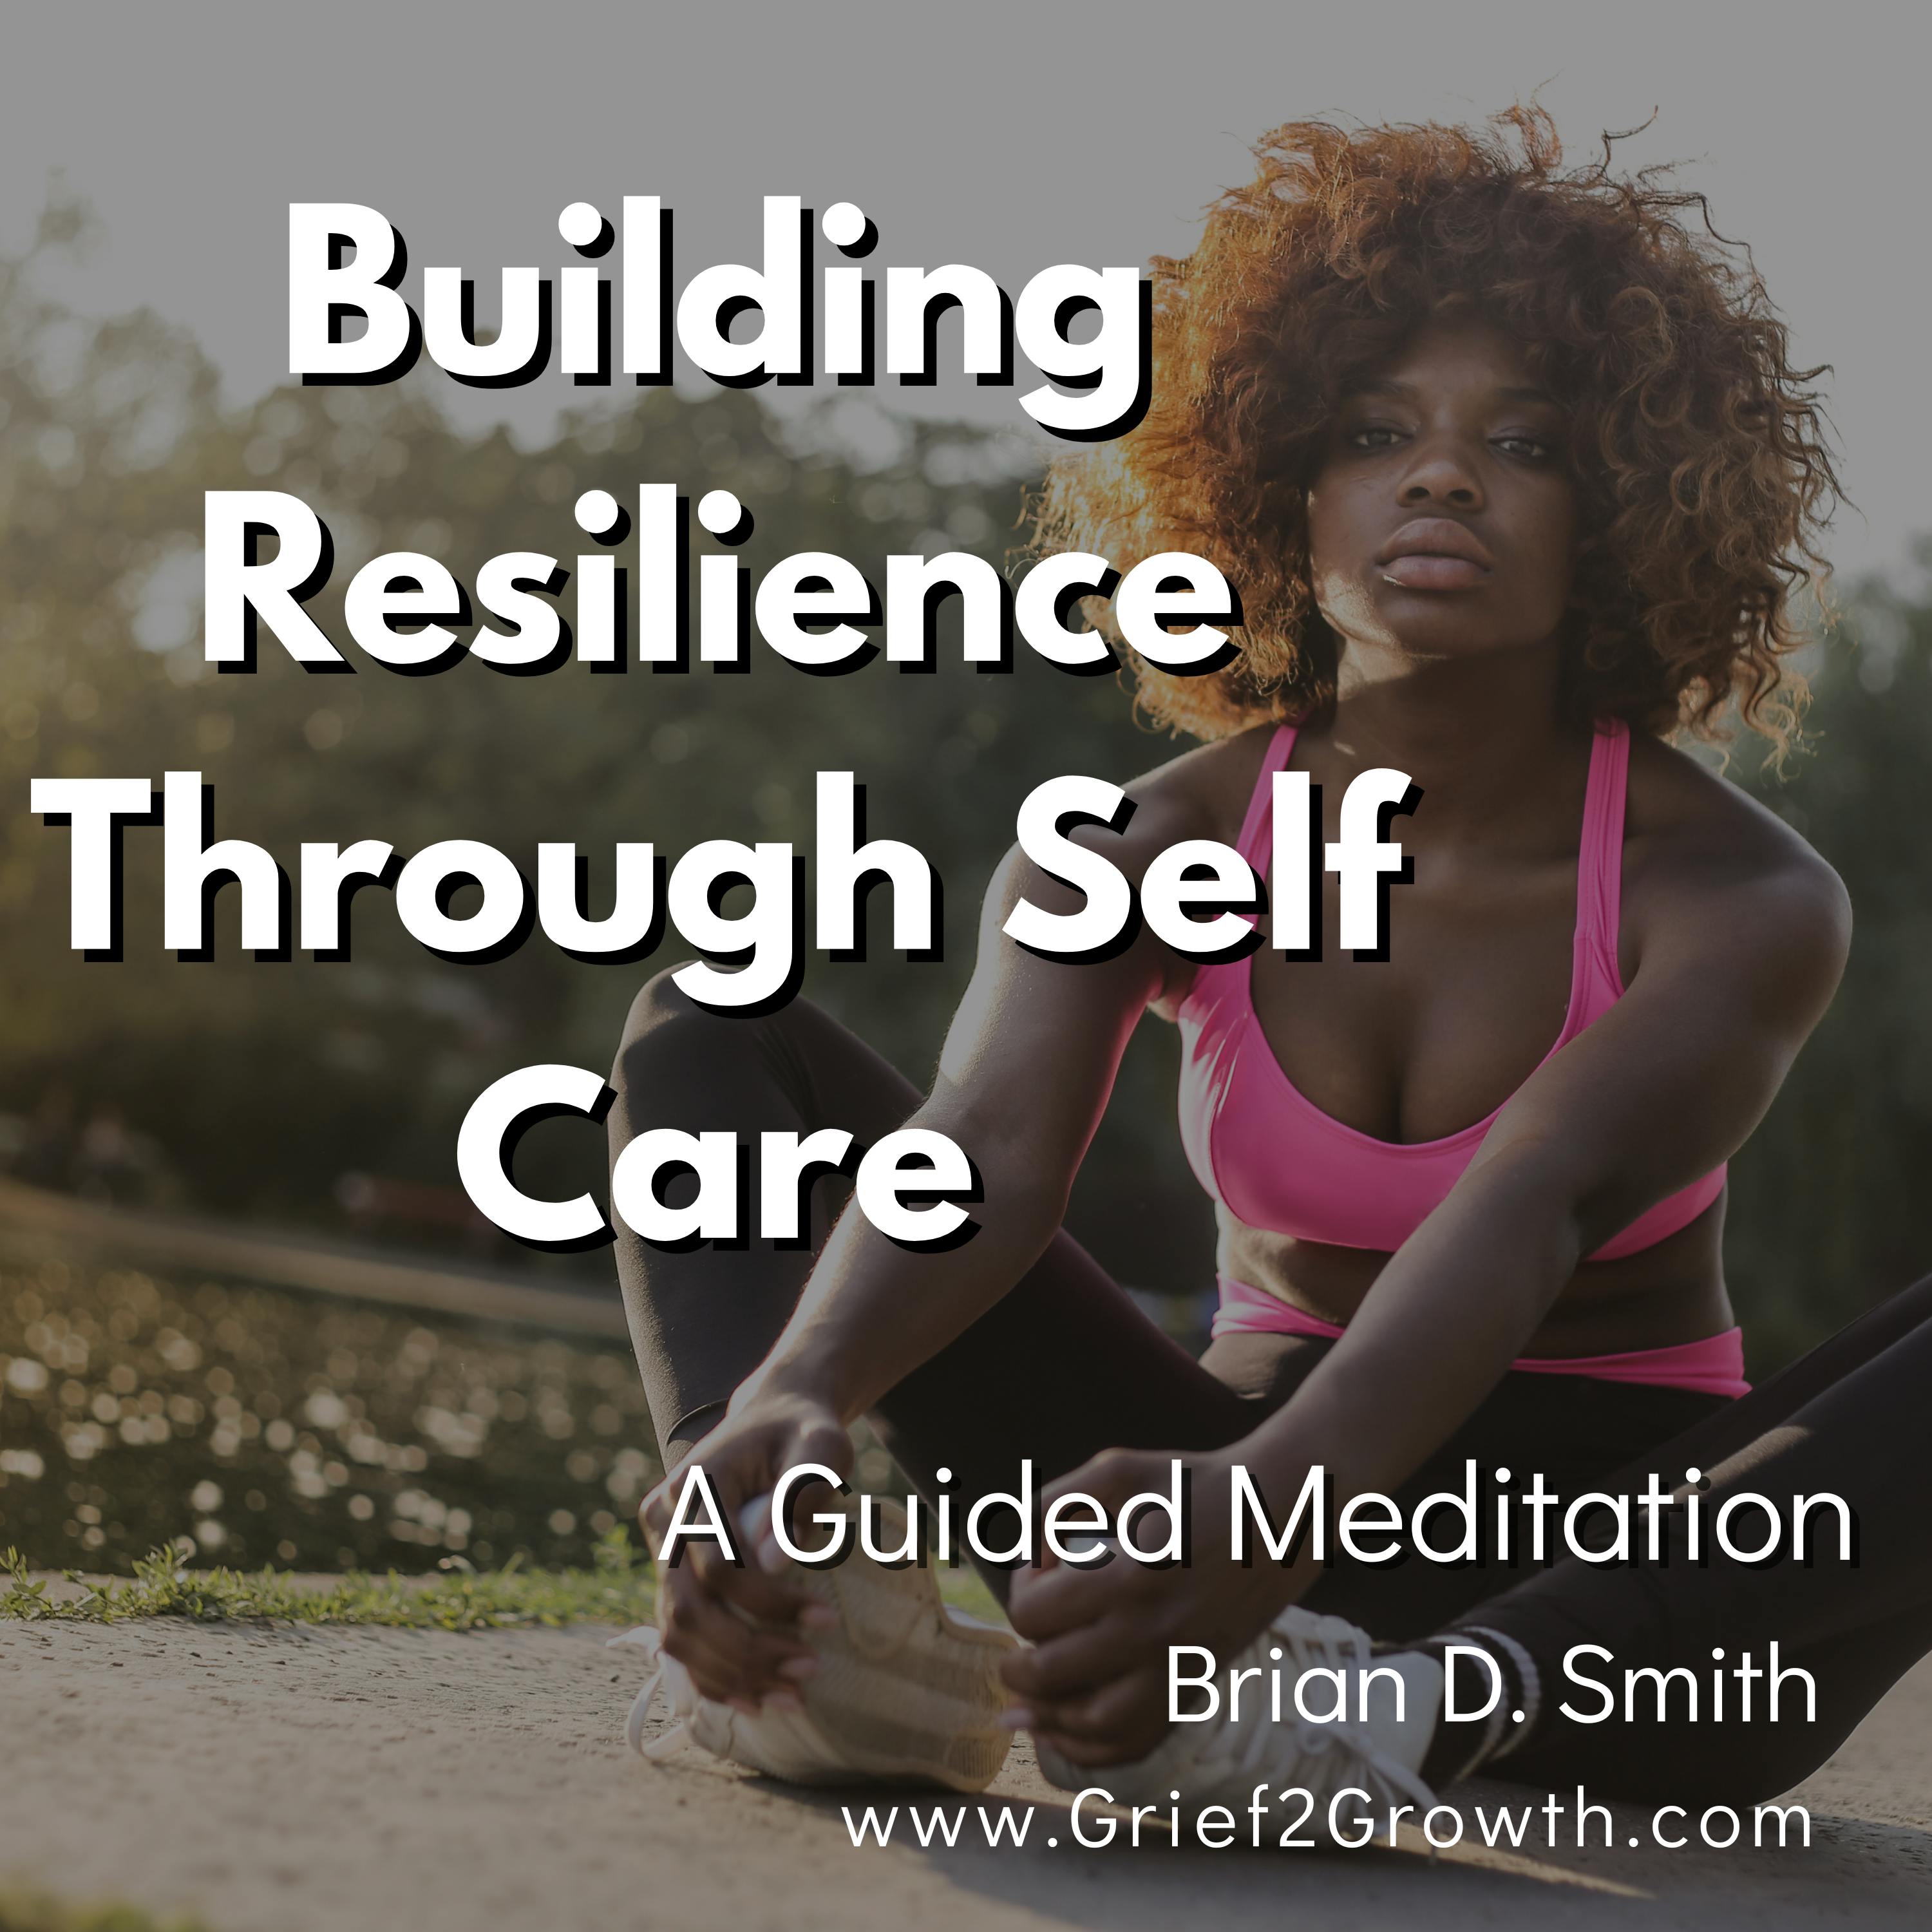 Build Resilience Through Self-Care